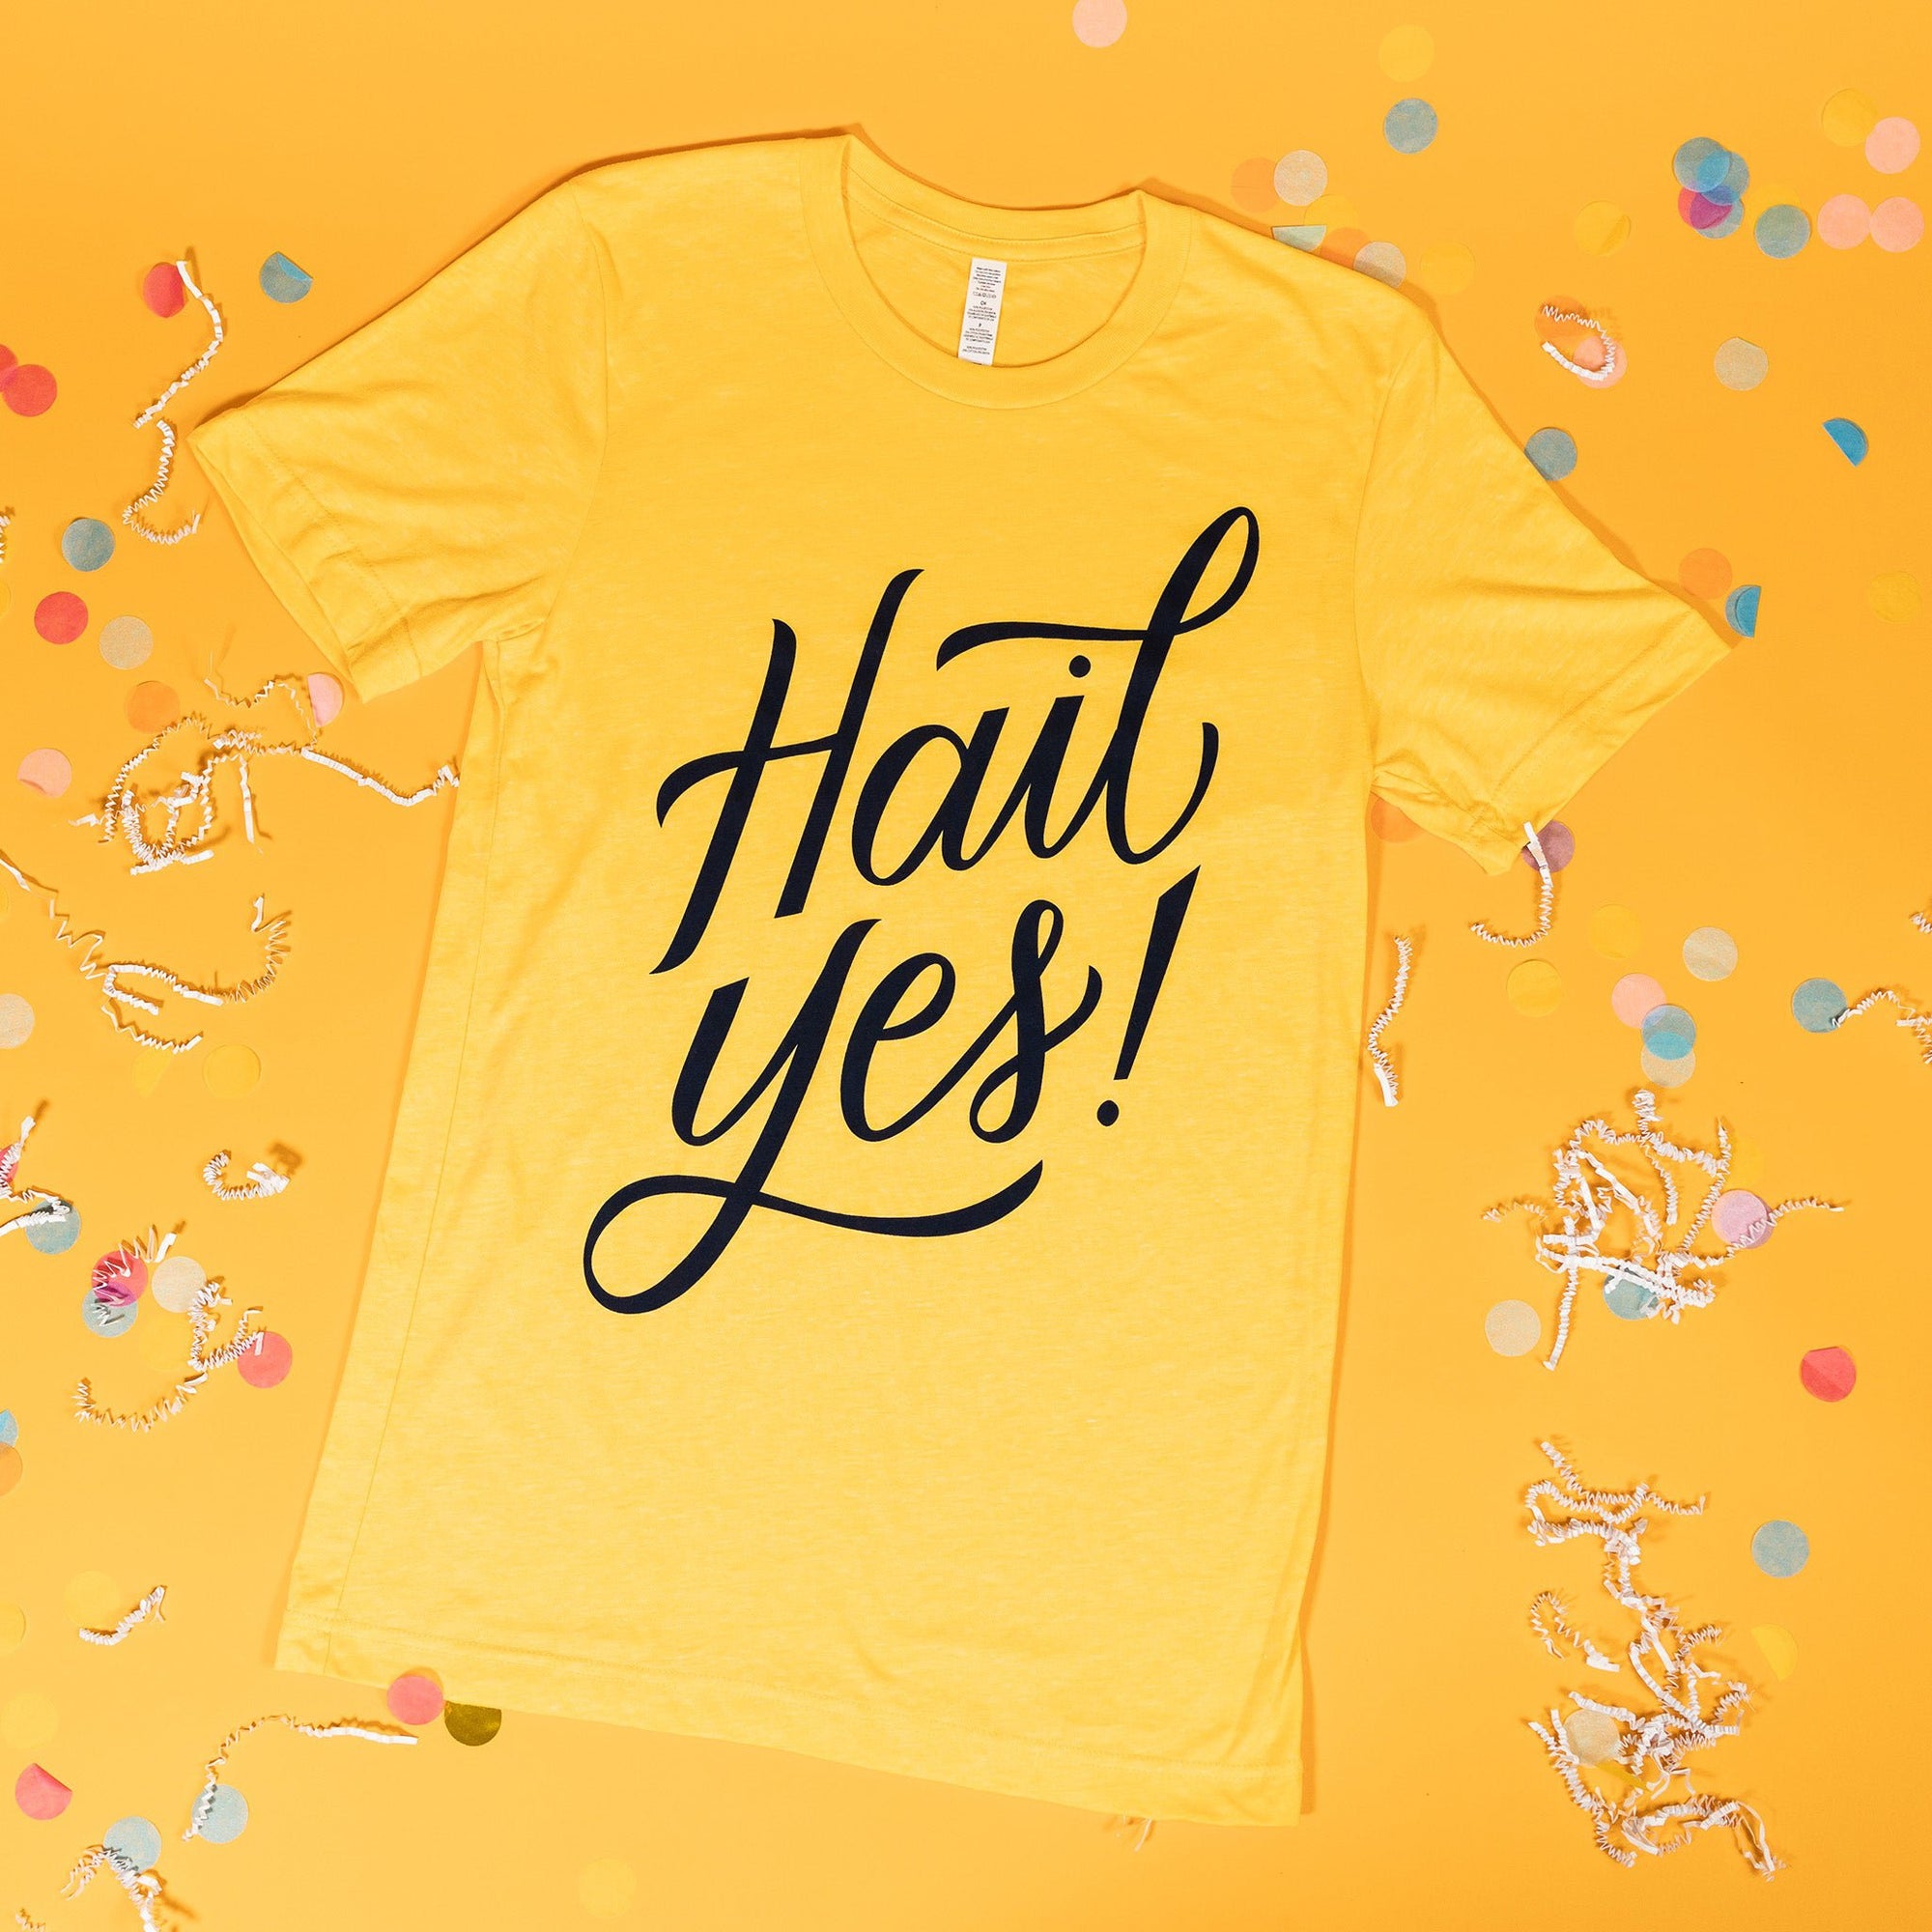 On a sunny mustard background sits a t-shirt with white crinkle and big, colorful confetti scattered around. This yellow tee says "Hail Yes!" in blue lettering.